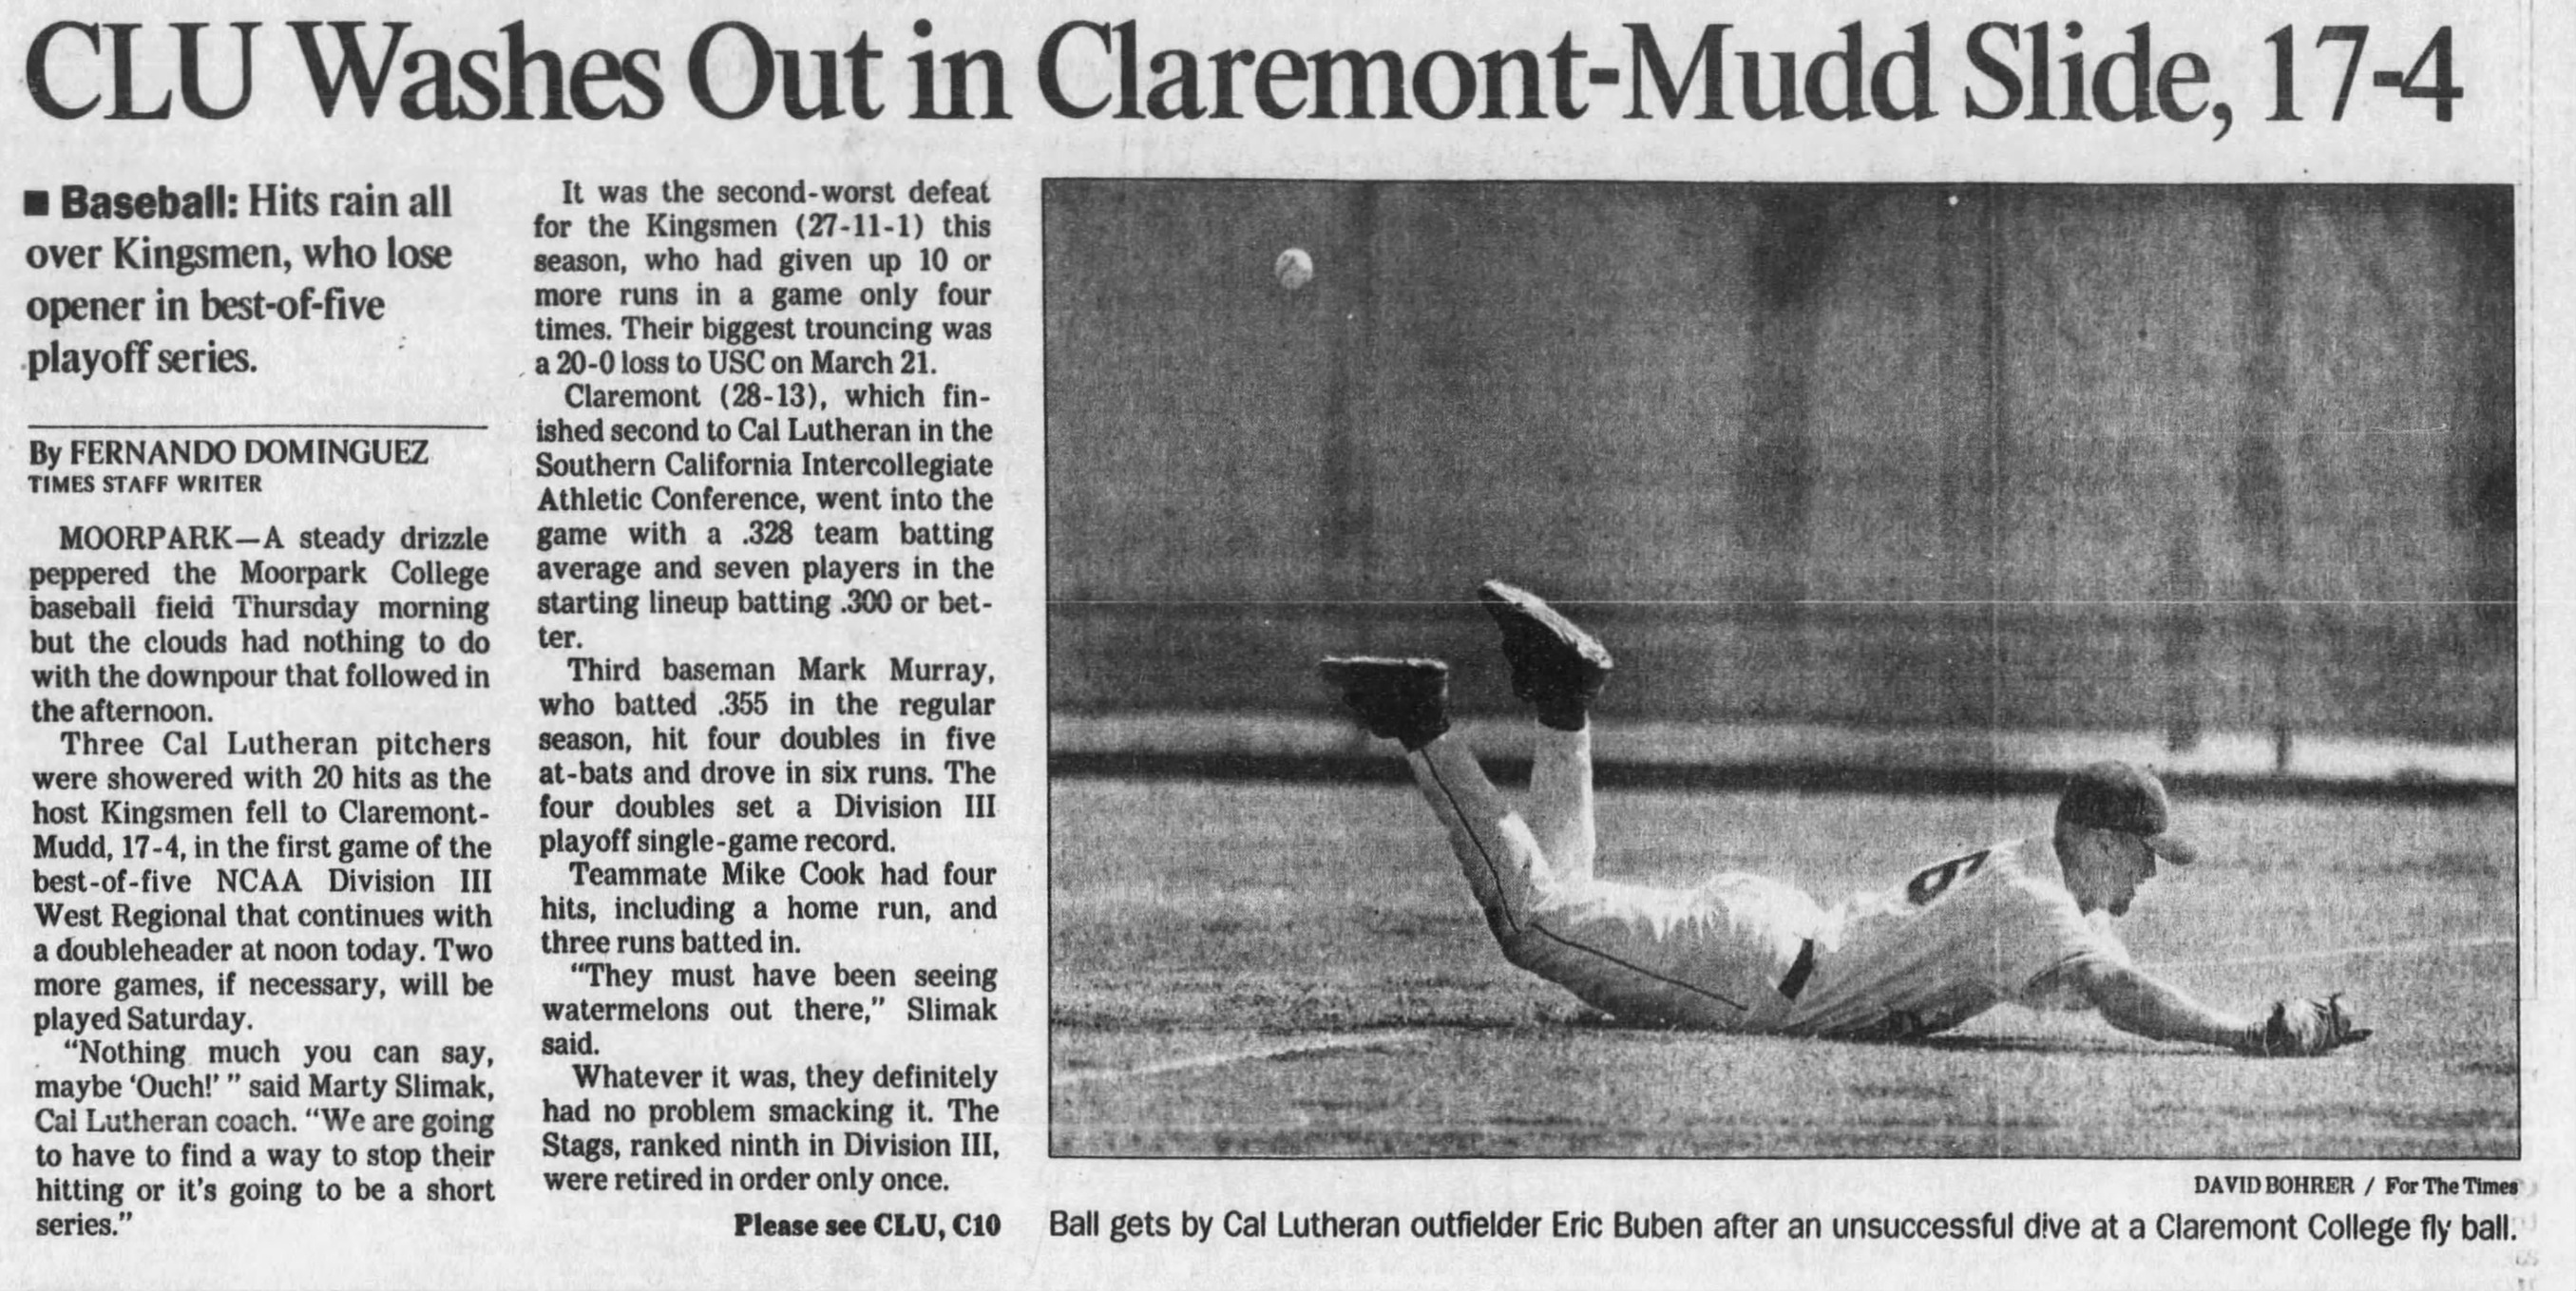 LA Times Clipping from opening game of series